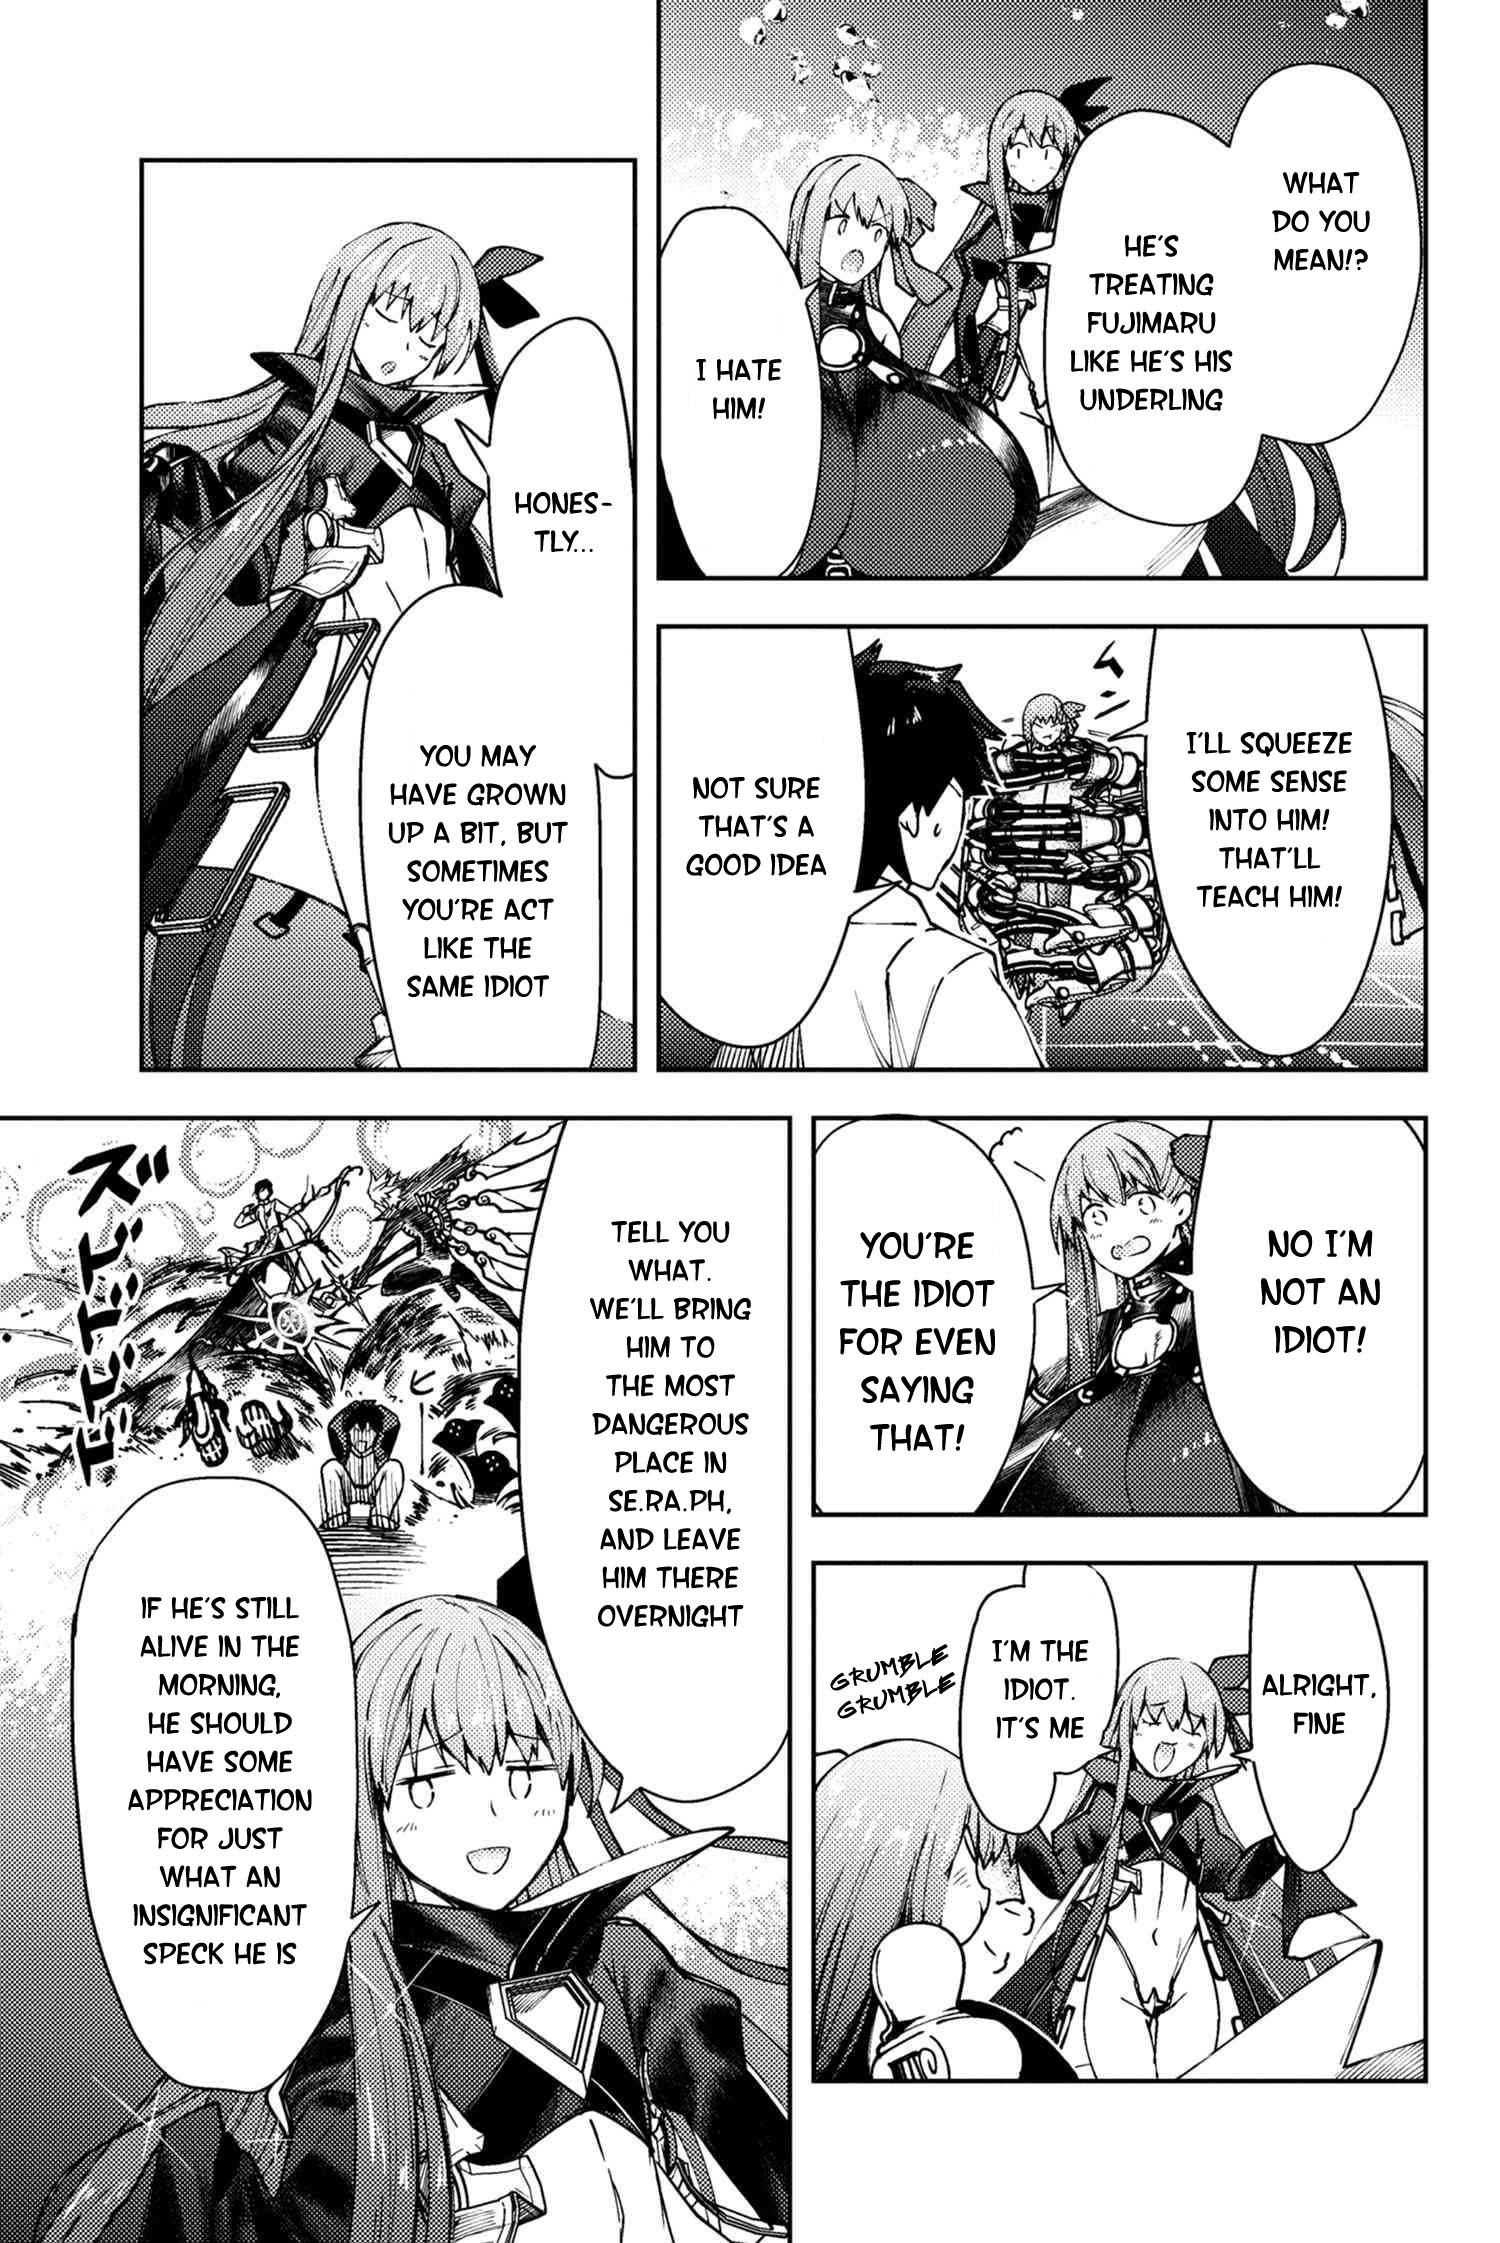 Fate/grand Order -Epic Of Remnant- Deep Sea Cyber-Paradise Se.ra.ph - 26.1 page 6-afe175c6